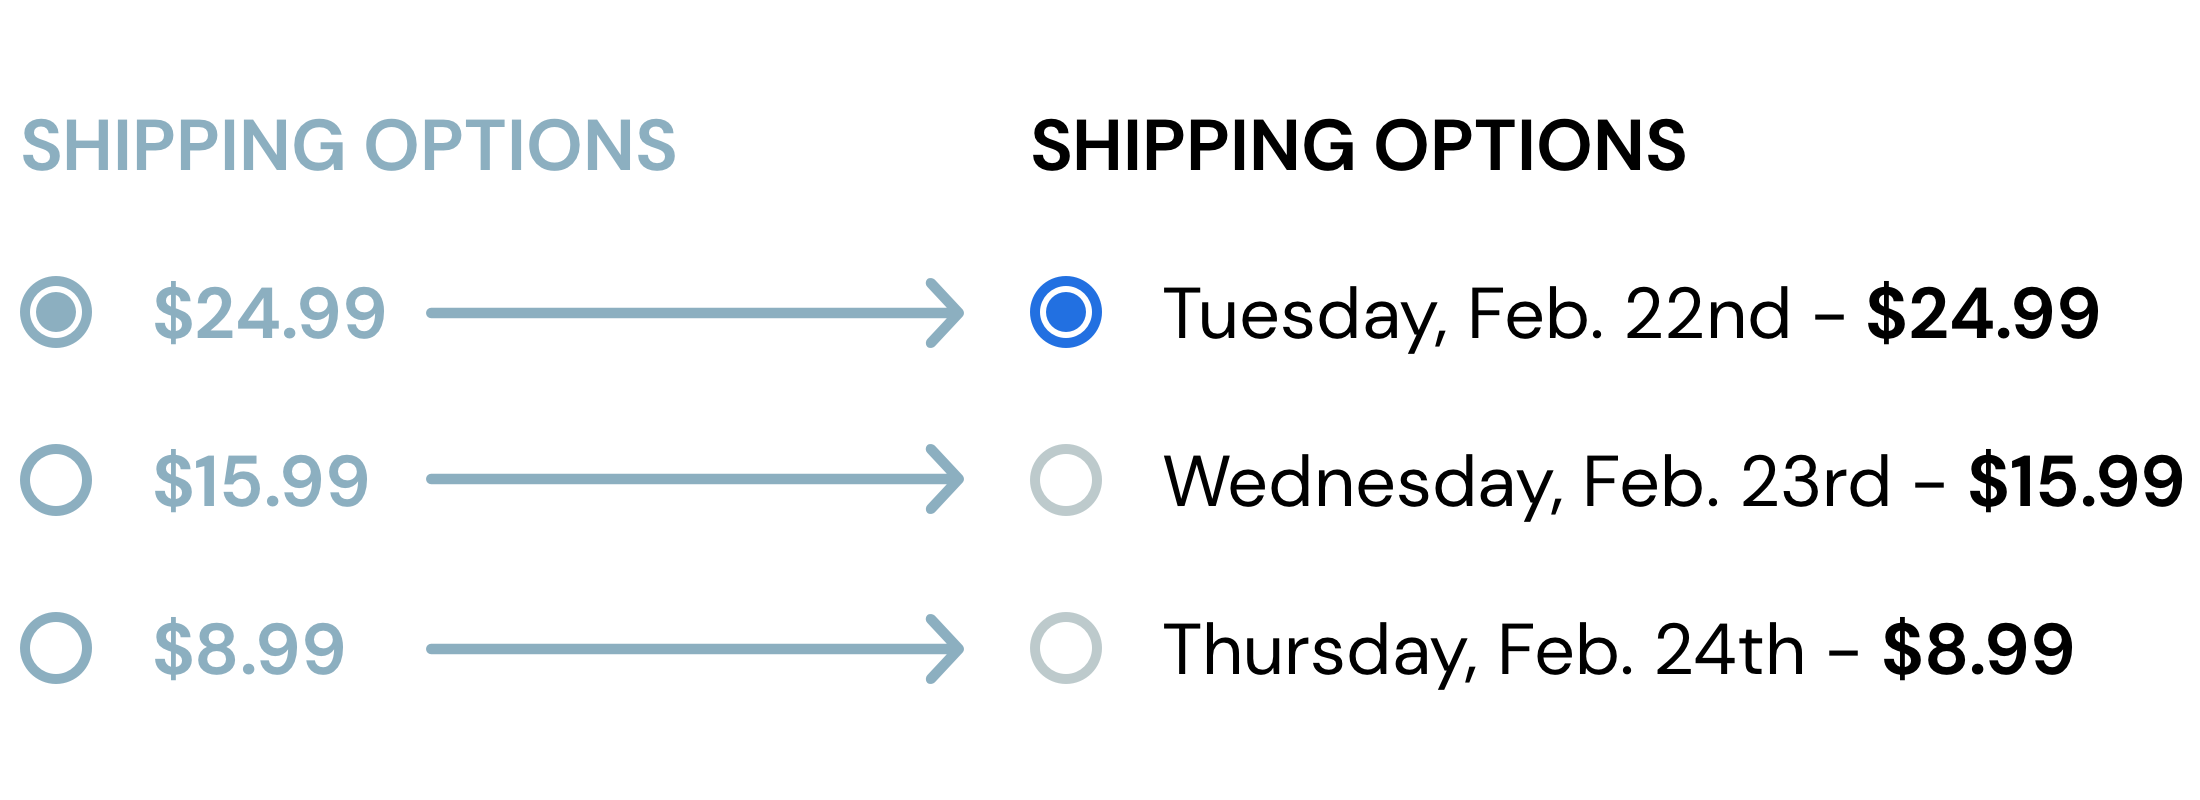 shipping-options-final